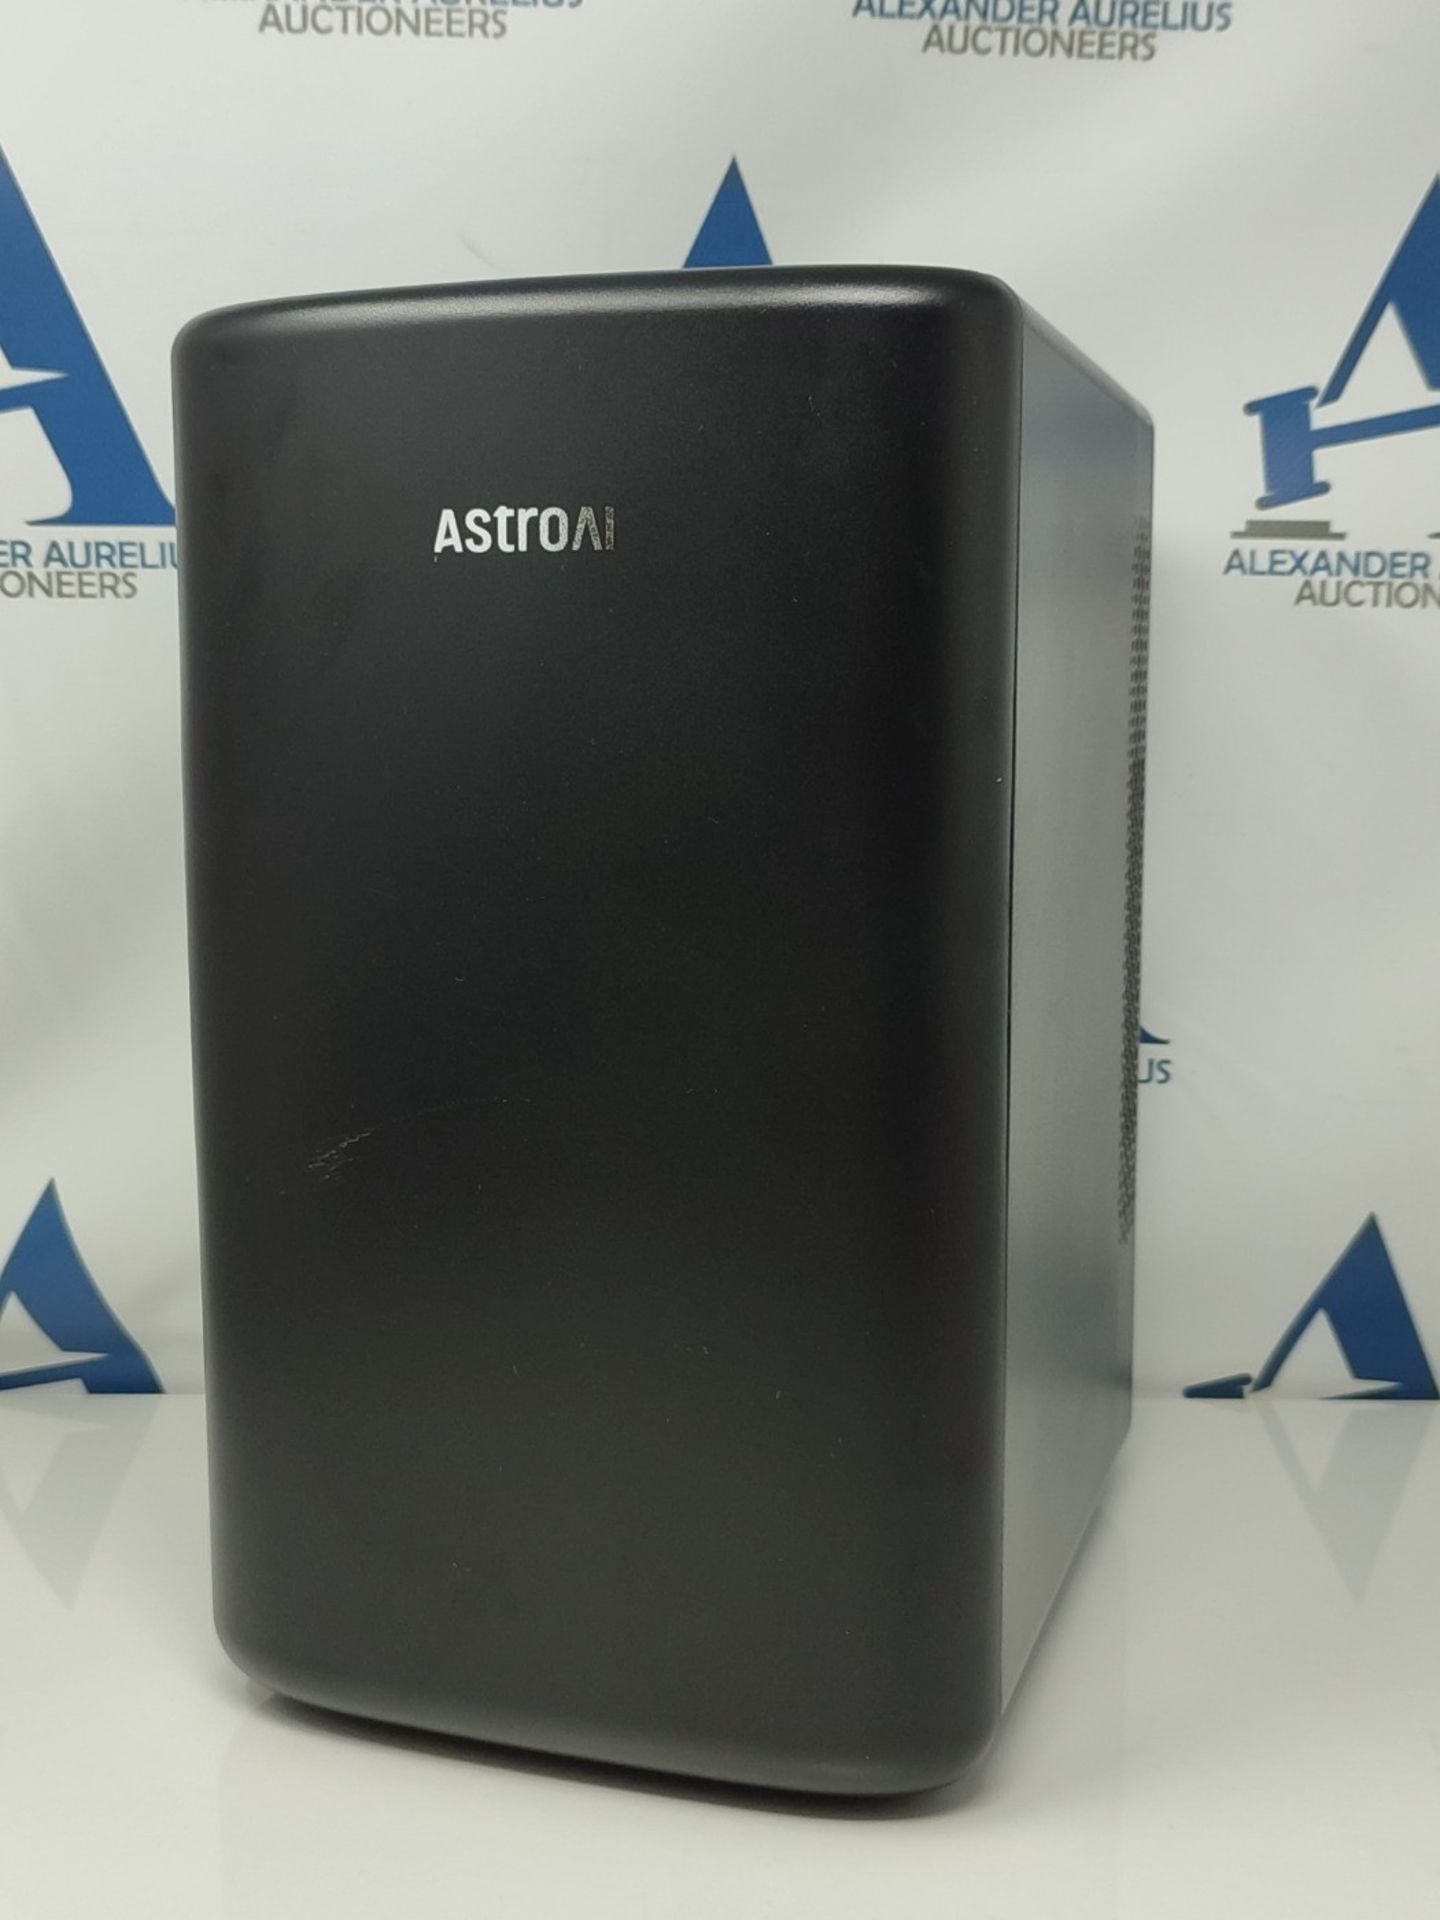 AstroAI Mini Fridge 6 Litre / 8 Can | Cooler and Warmer | AC/DC | Small Fridge for Bed - Image 3 of 3